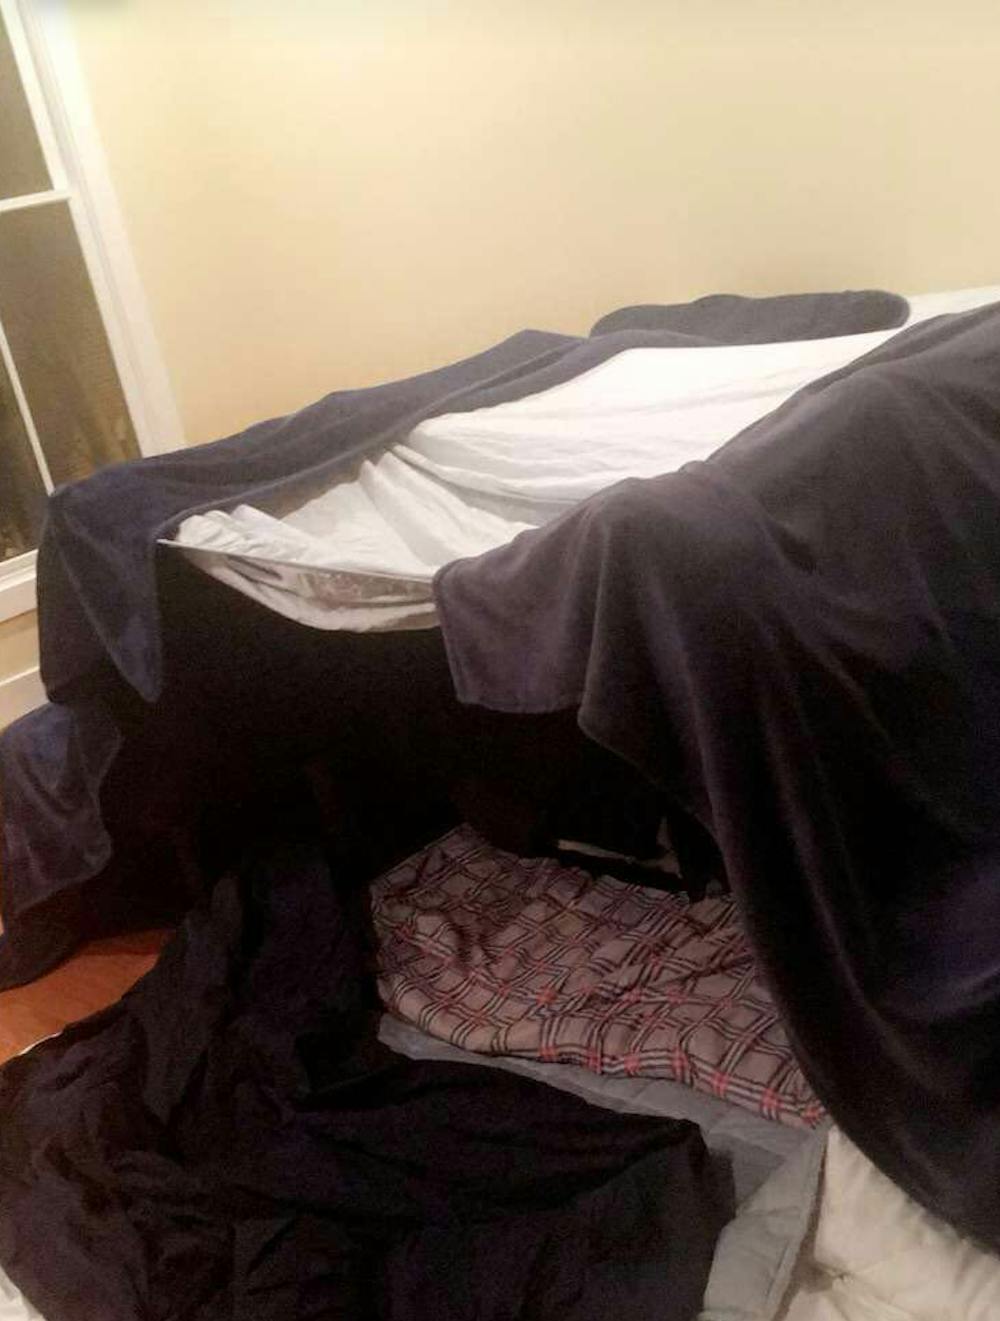 COURTESY OF ASTHA BERRY
Make the mess in your living room seem purposeful: Build a blanket fort.